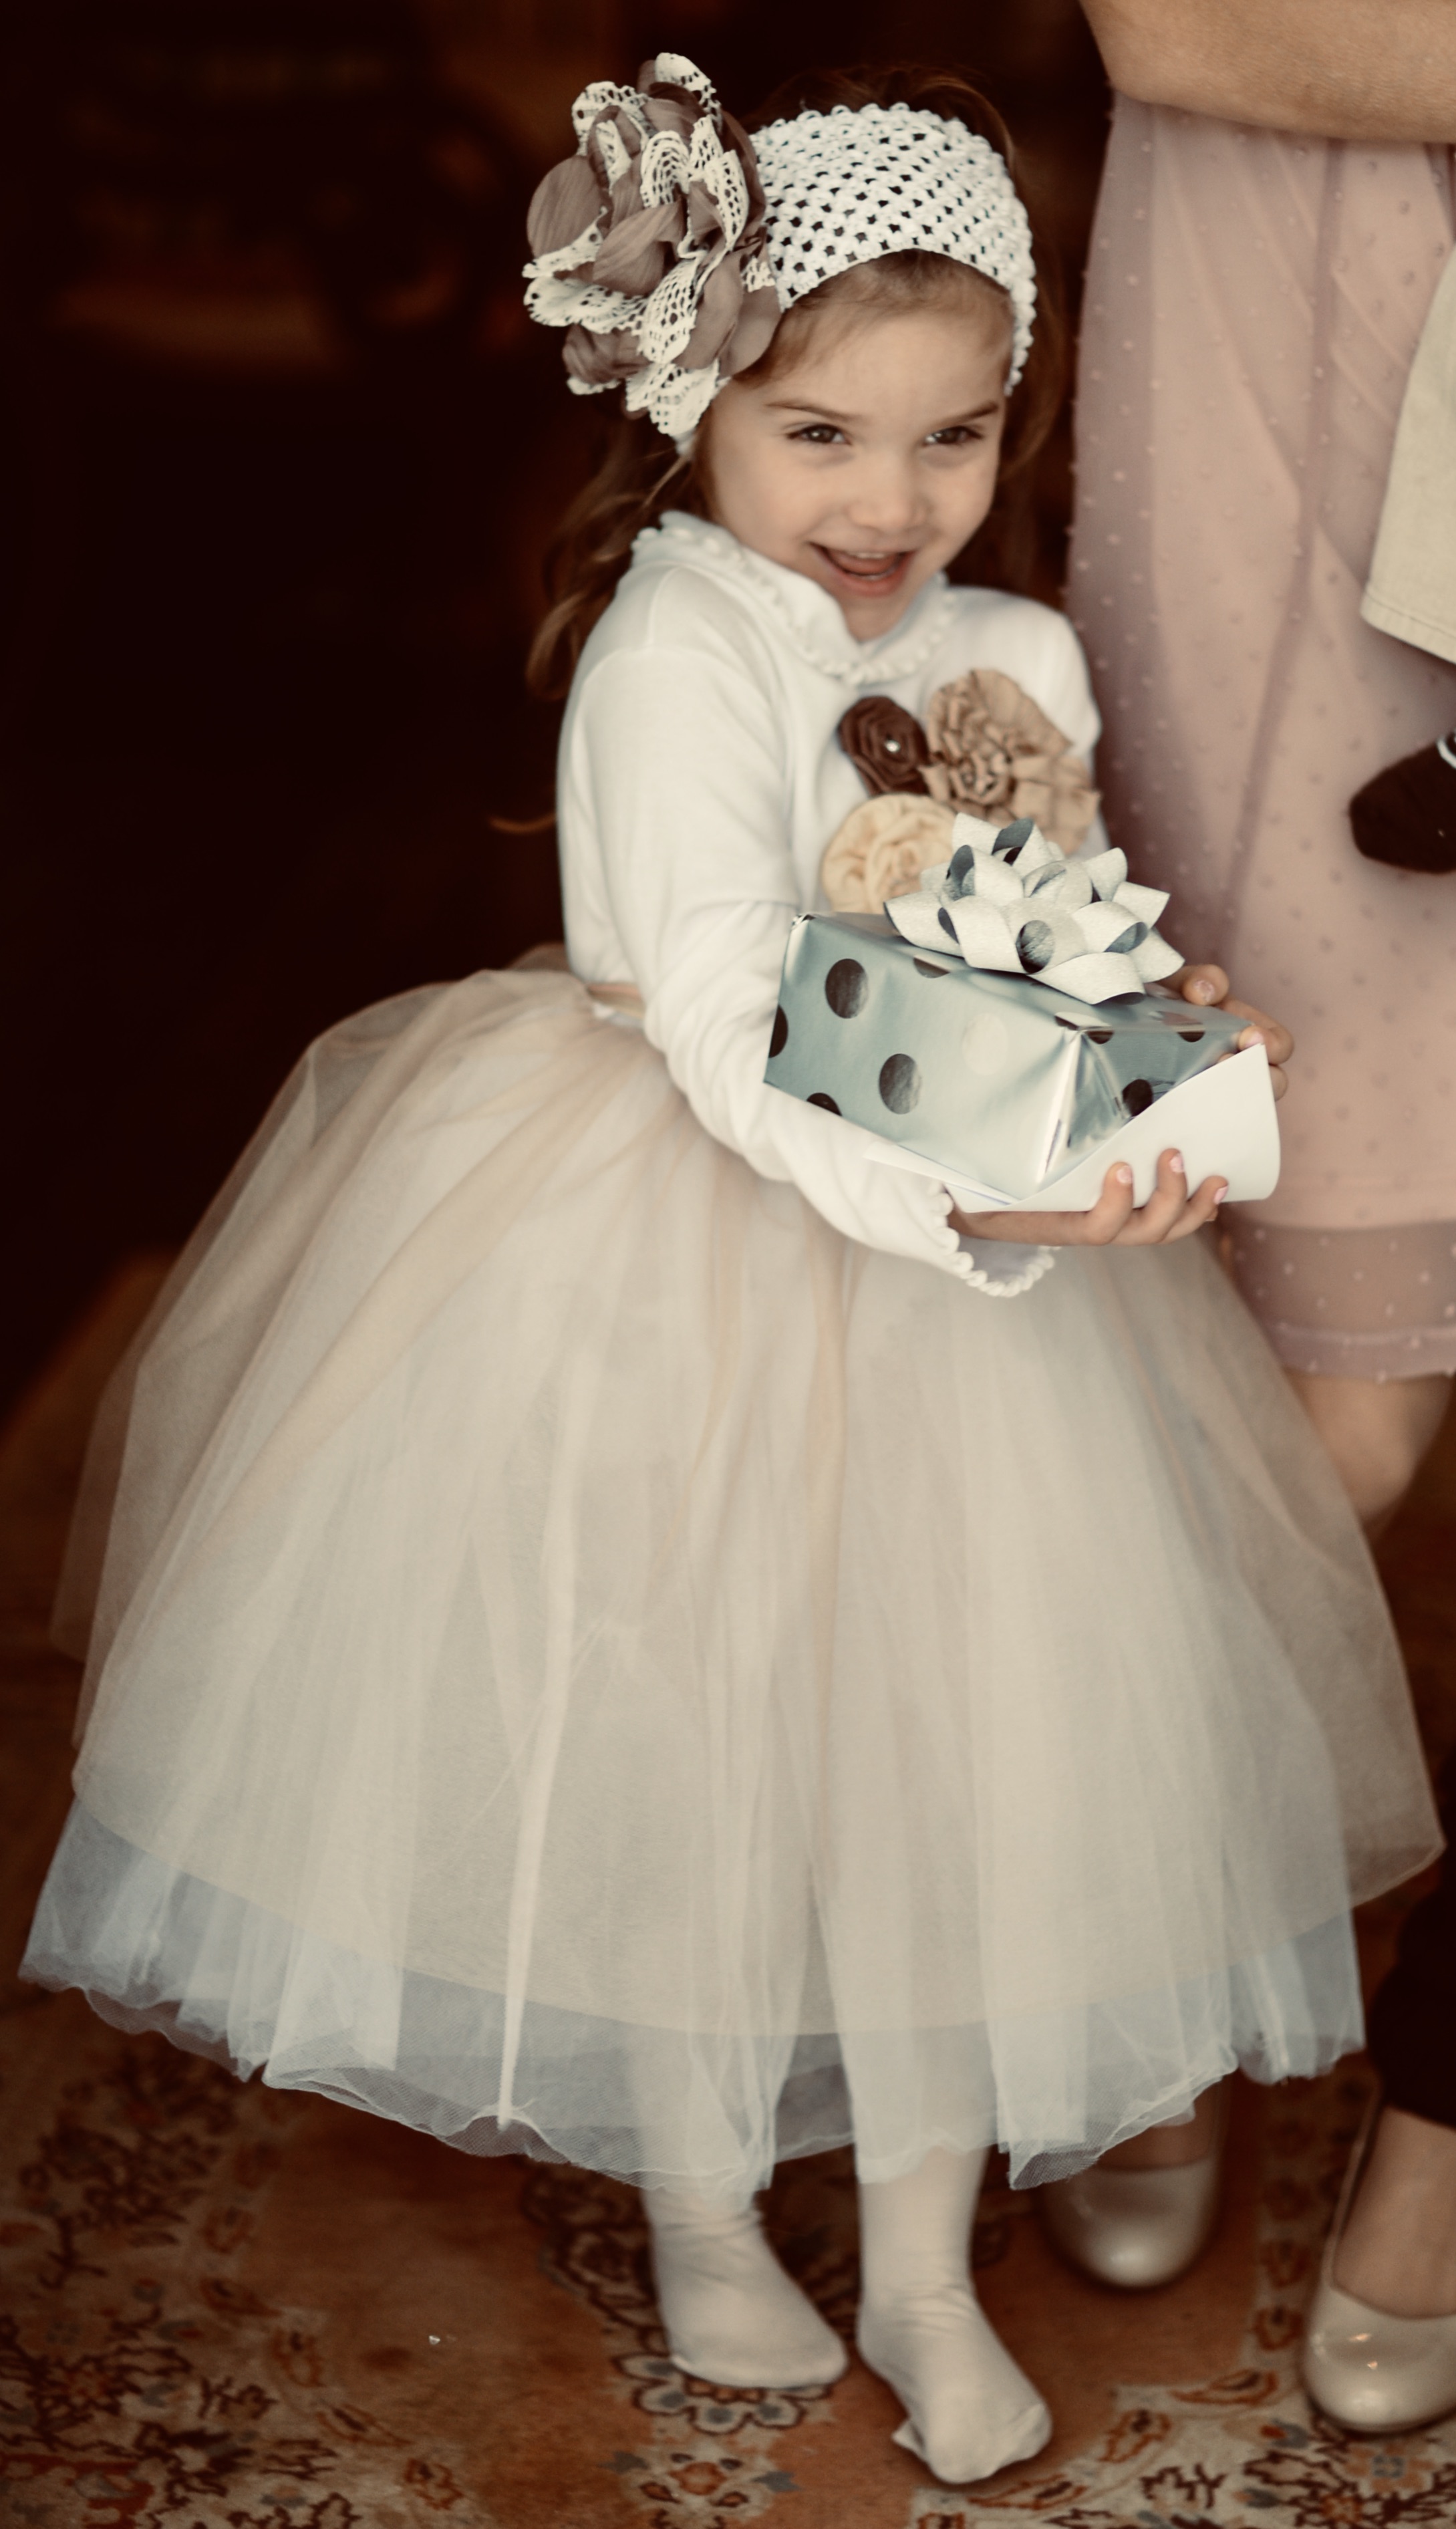 Find unique and traditional ideas for your flower girl.  Dresses, baskets, flower girl headpieces, and other great inspiration.